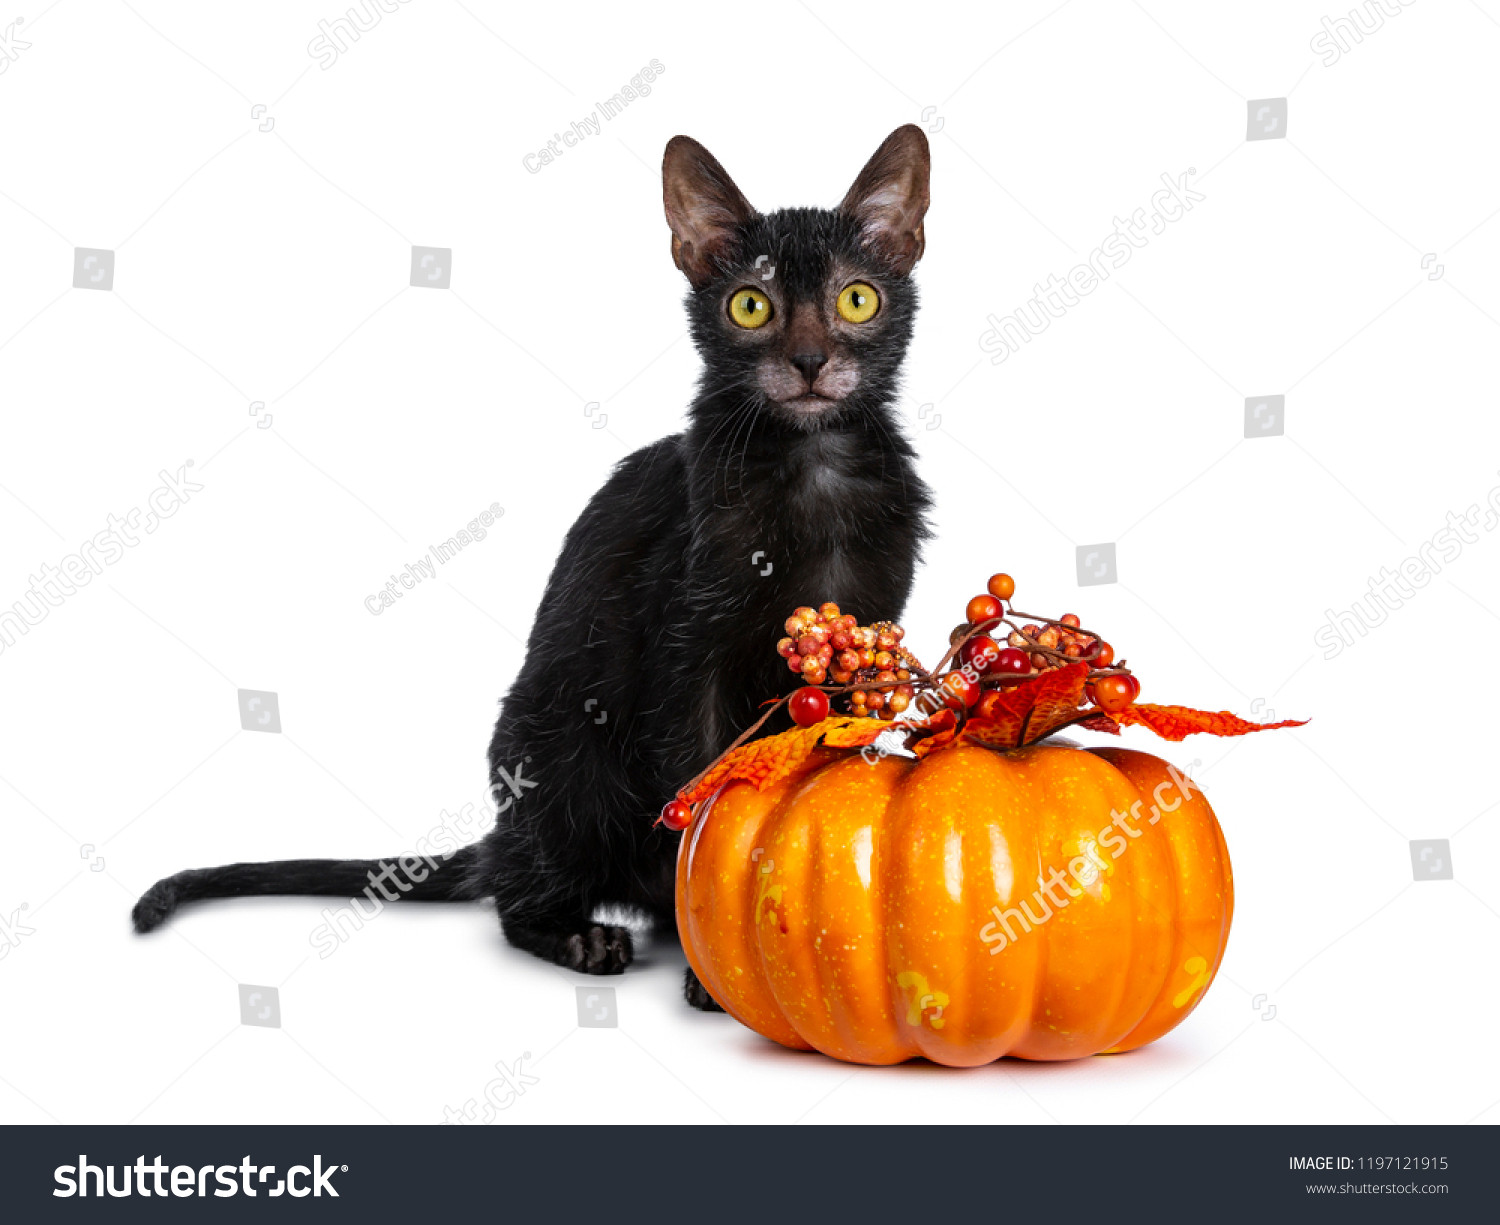 Young adult black Lykoi cat kitten sitting beside an orange pumpkin looking straight in camera with yellow eyes, isolated on white backgroud #1197121915